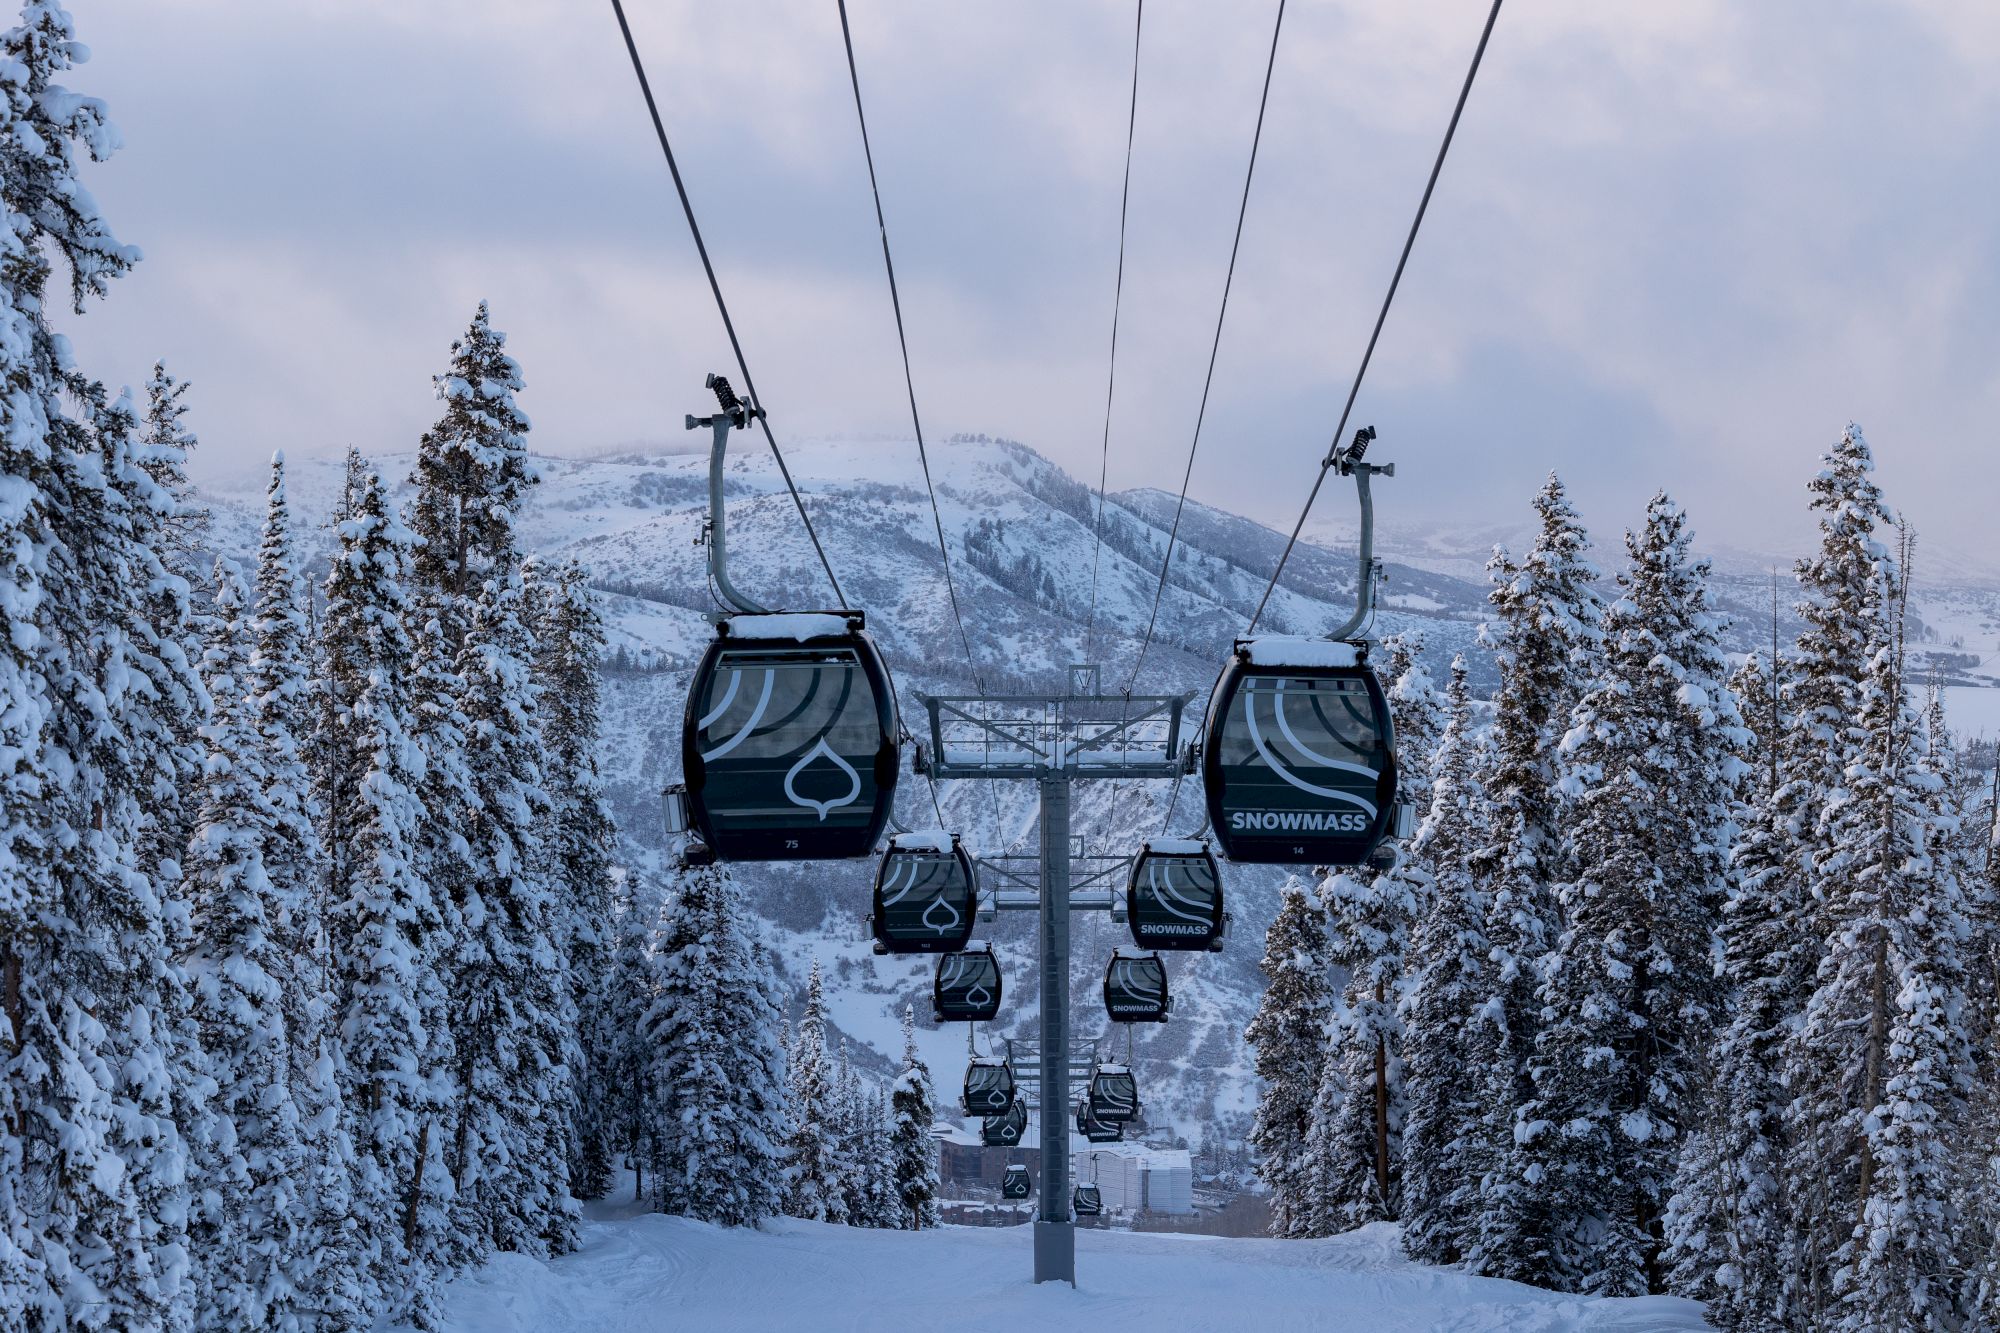 Snowy landscape with cable cars traveling through the tree-covered slopes of a mountain. The image depicts a ski lift in a winter setting.